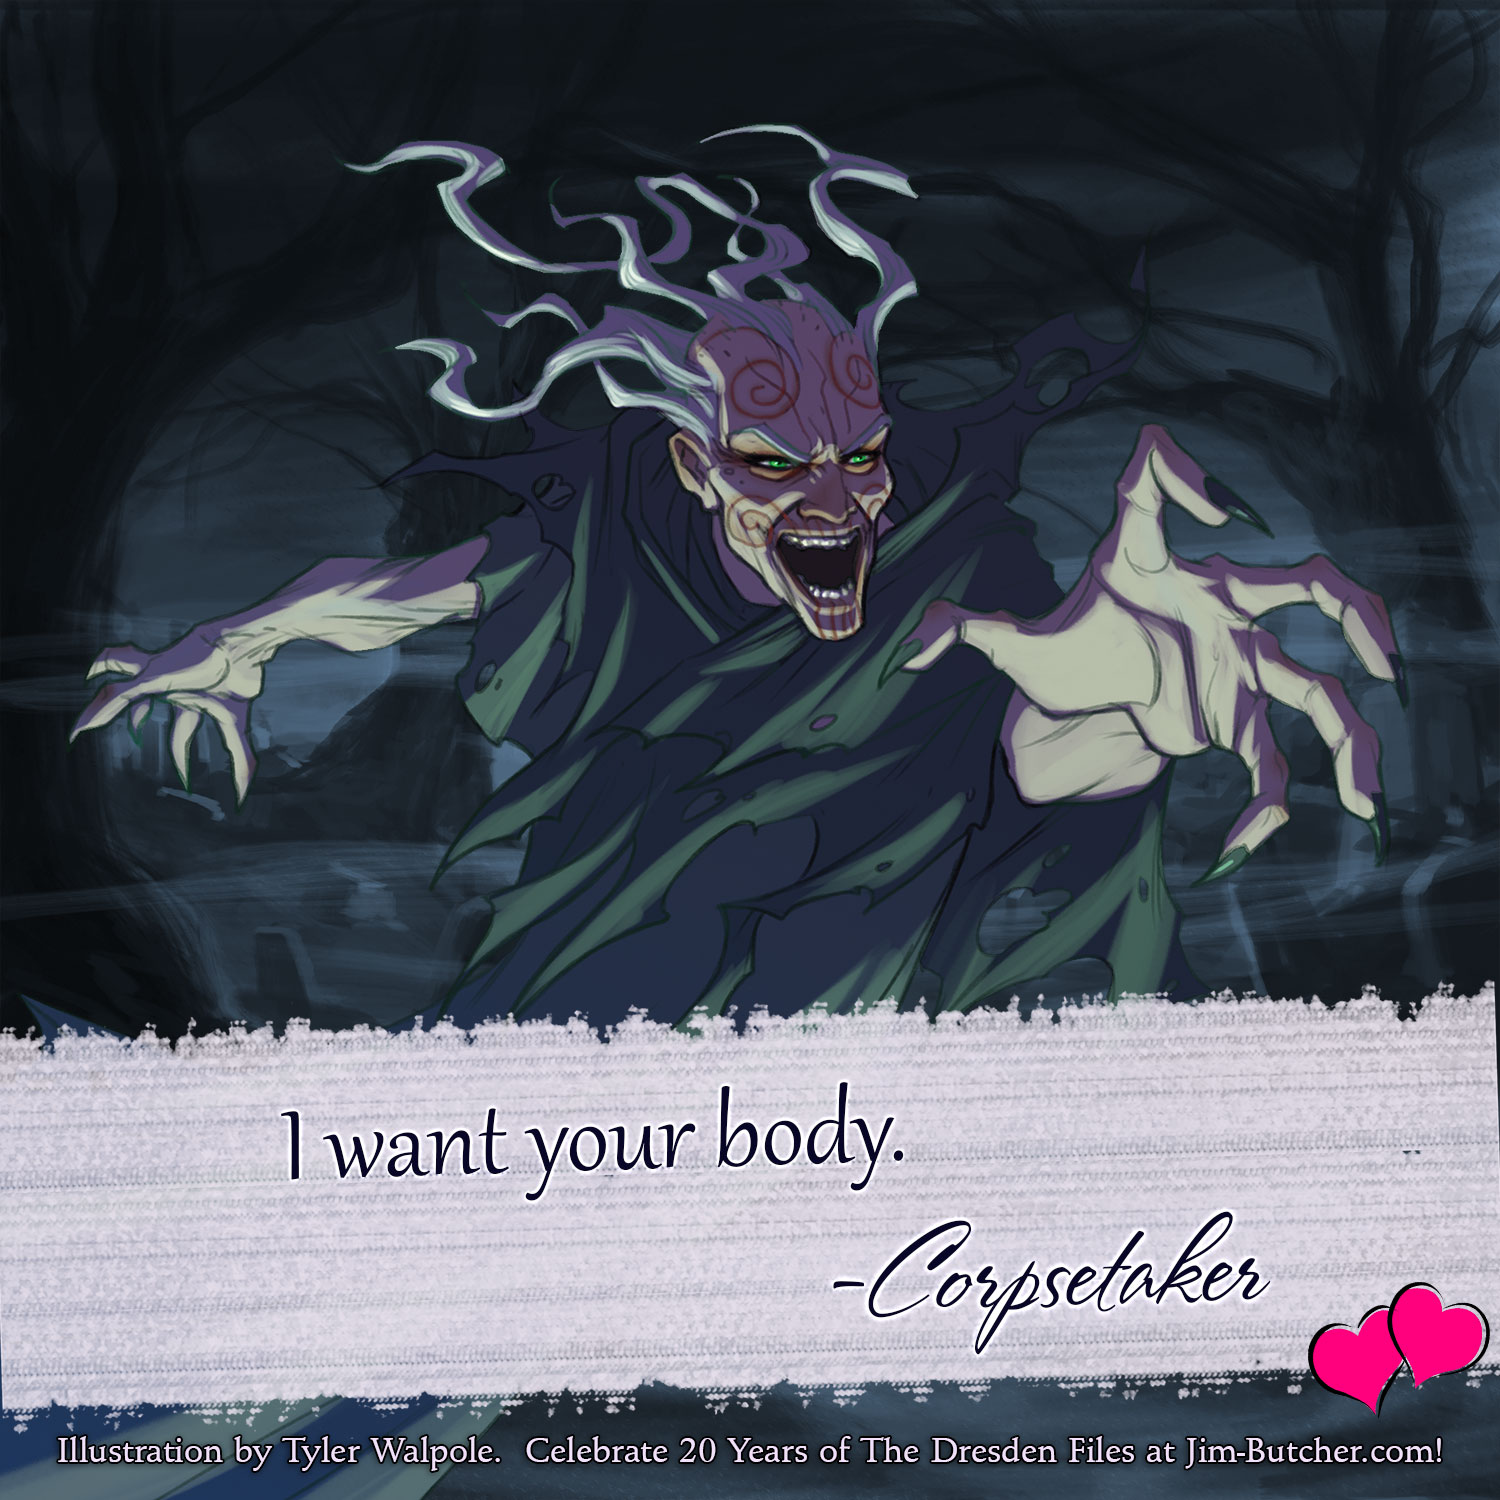 Corpsetaker: I want your body.